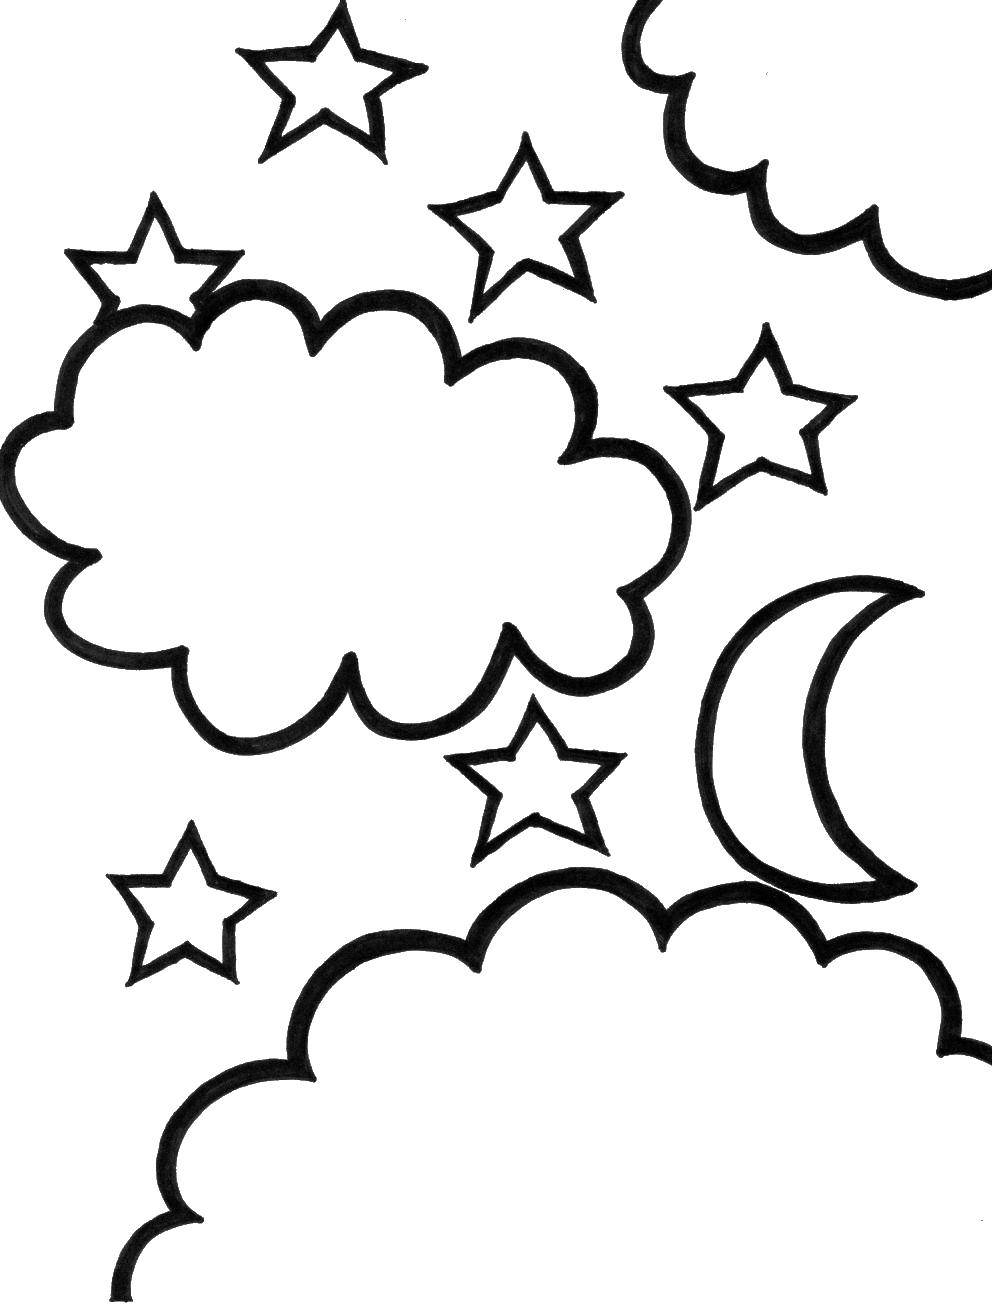 Coloring Starry sky and a Crescent moon in the clouds. Category Coloring pages for kids. Tags:  Night, month, star.